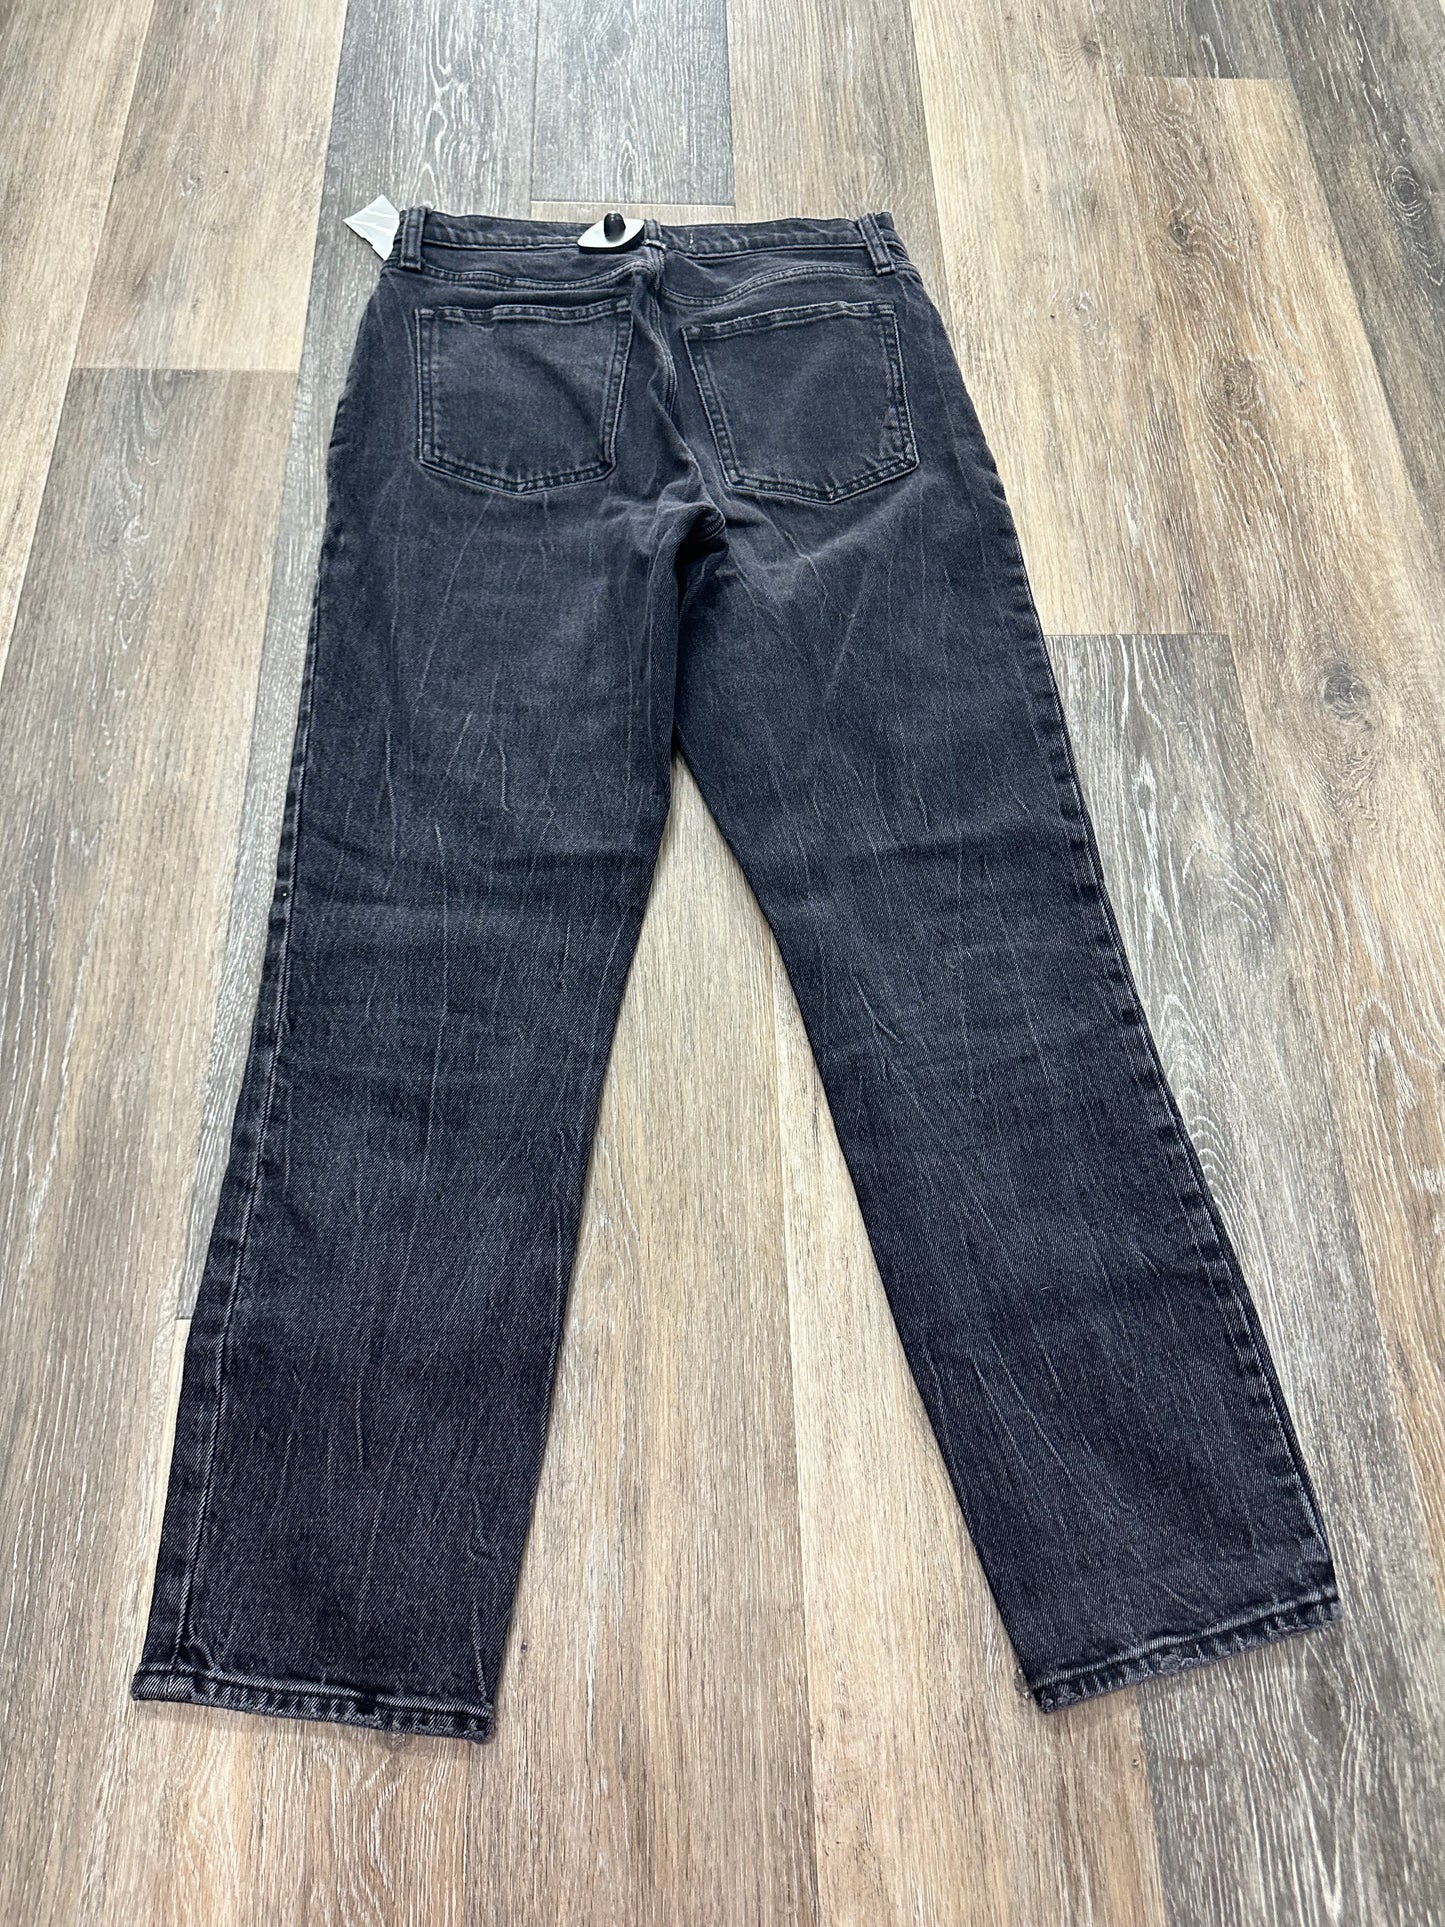 Jeans Straight By Abercrombie And Fitch  Size: 6long